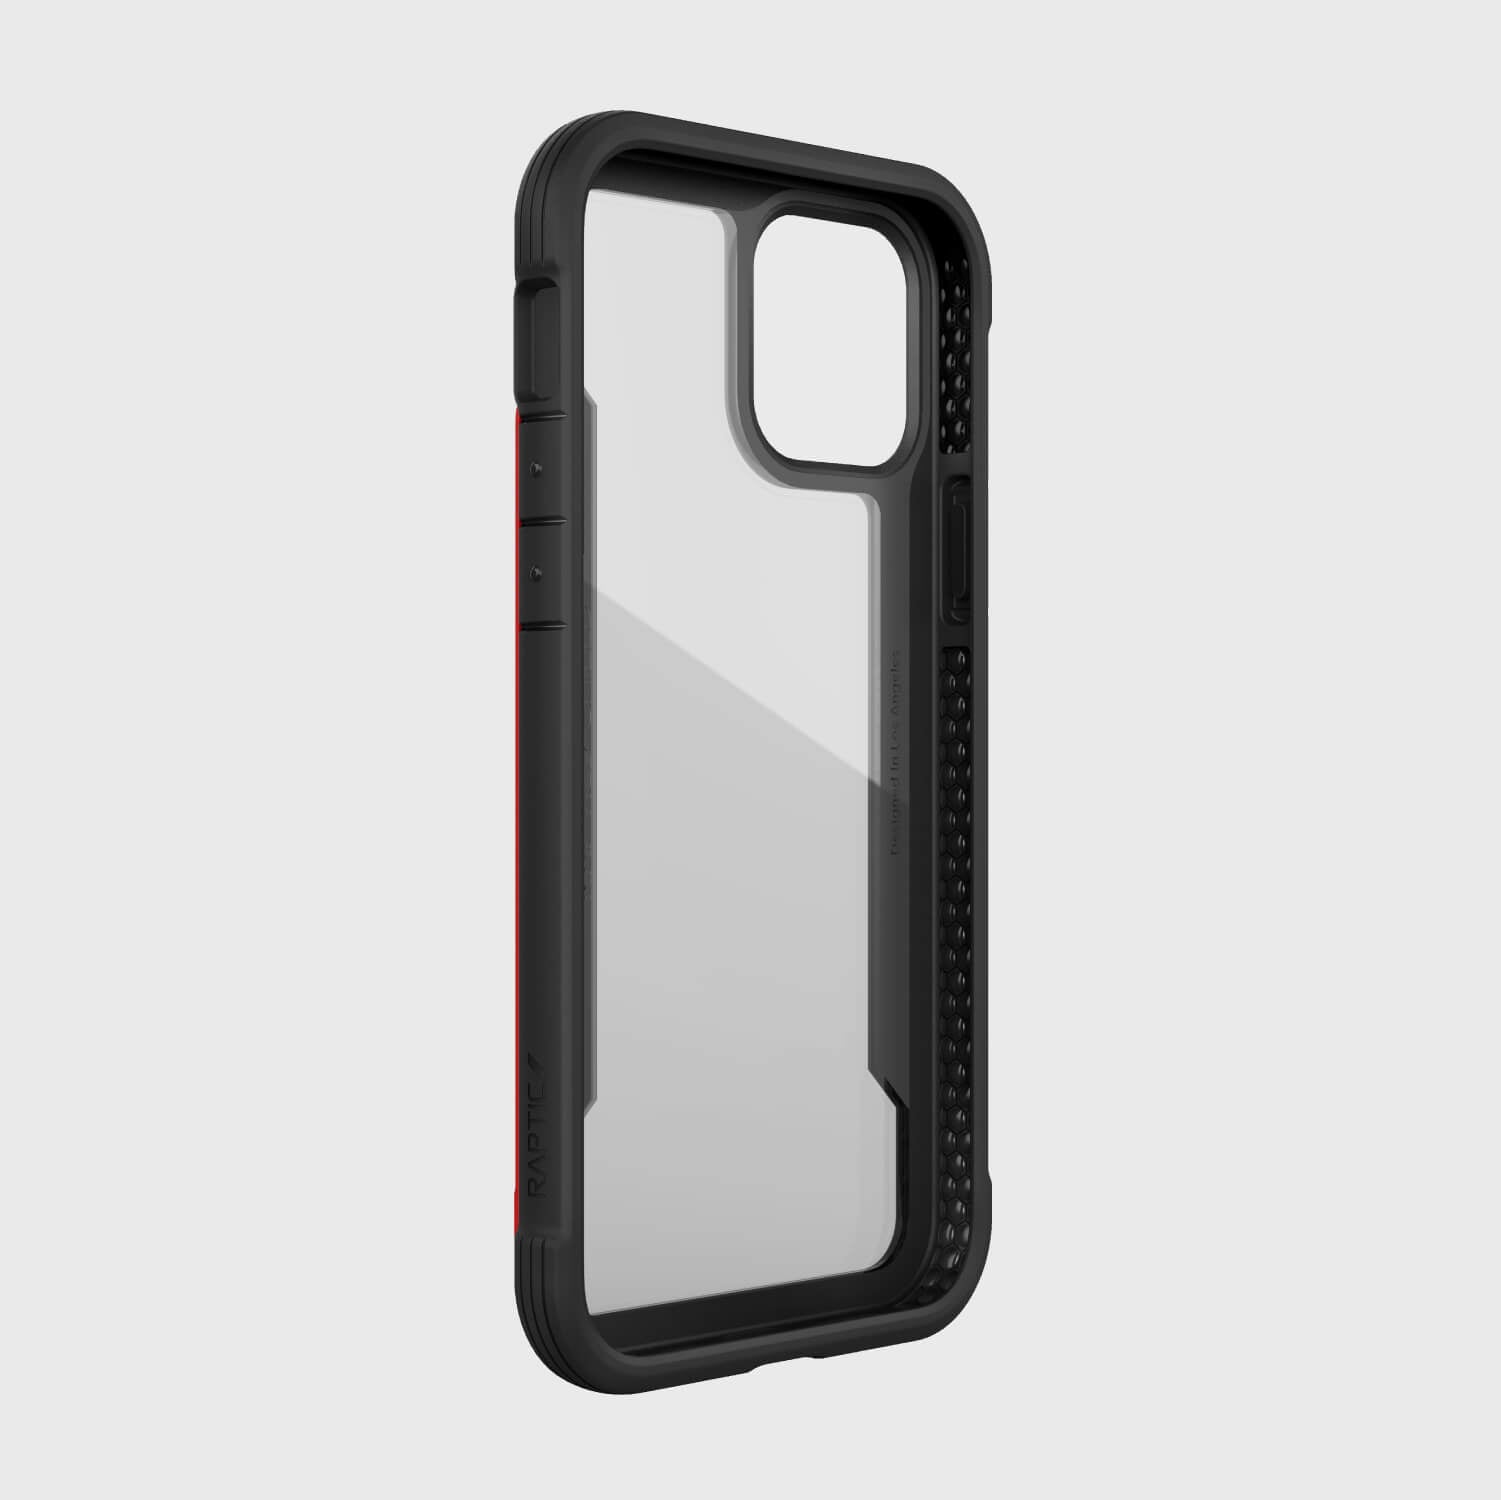 The Raptic iPhone 12 & iPhone 12 Pro Case - SHIELD provides protection and is black and red.